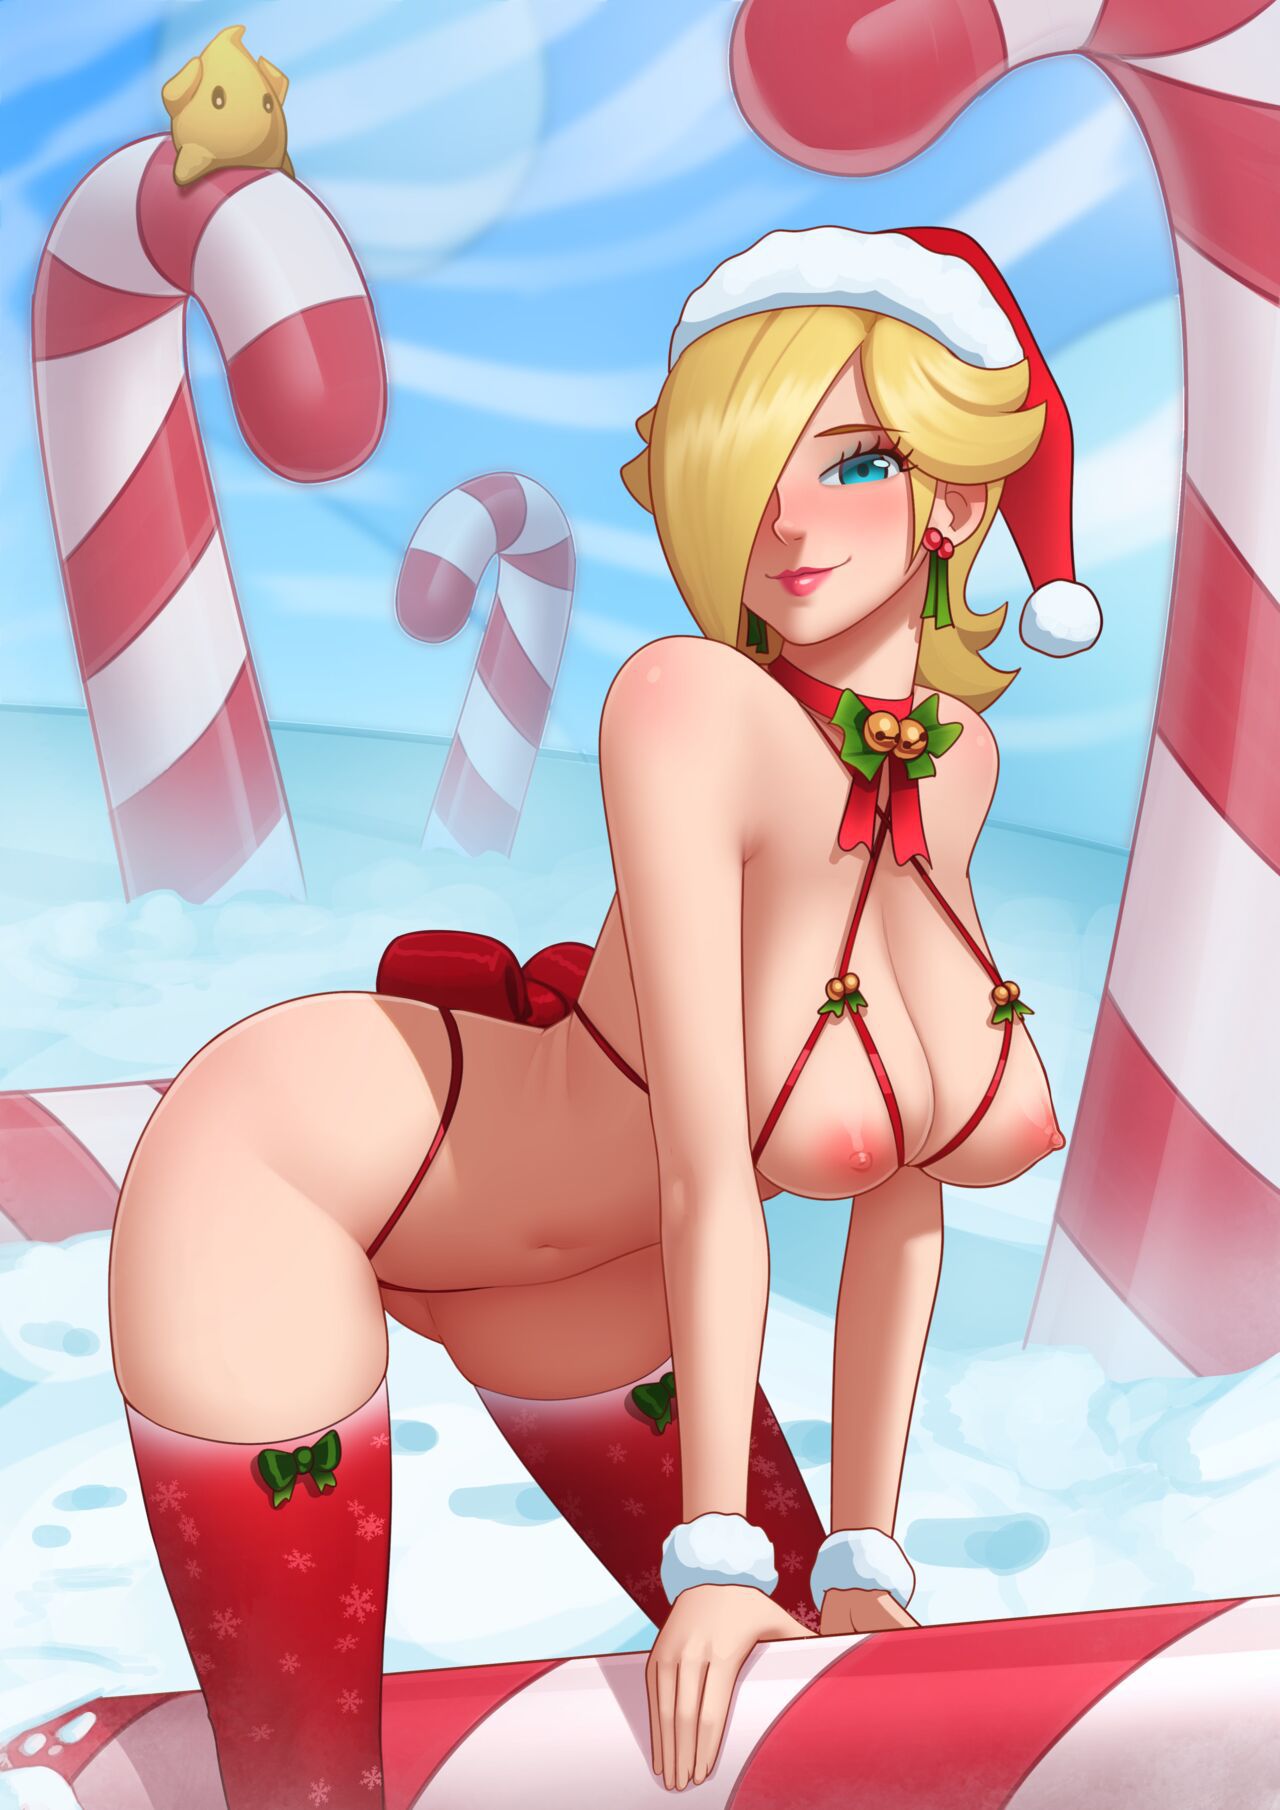 [Deilan12] Candy Canes Appeared 10